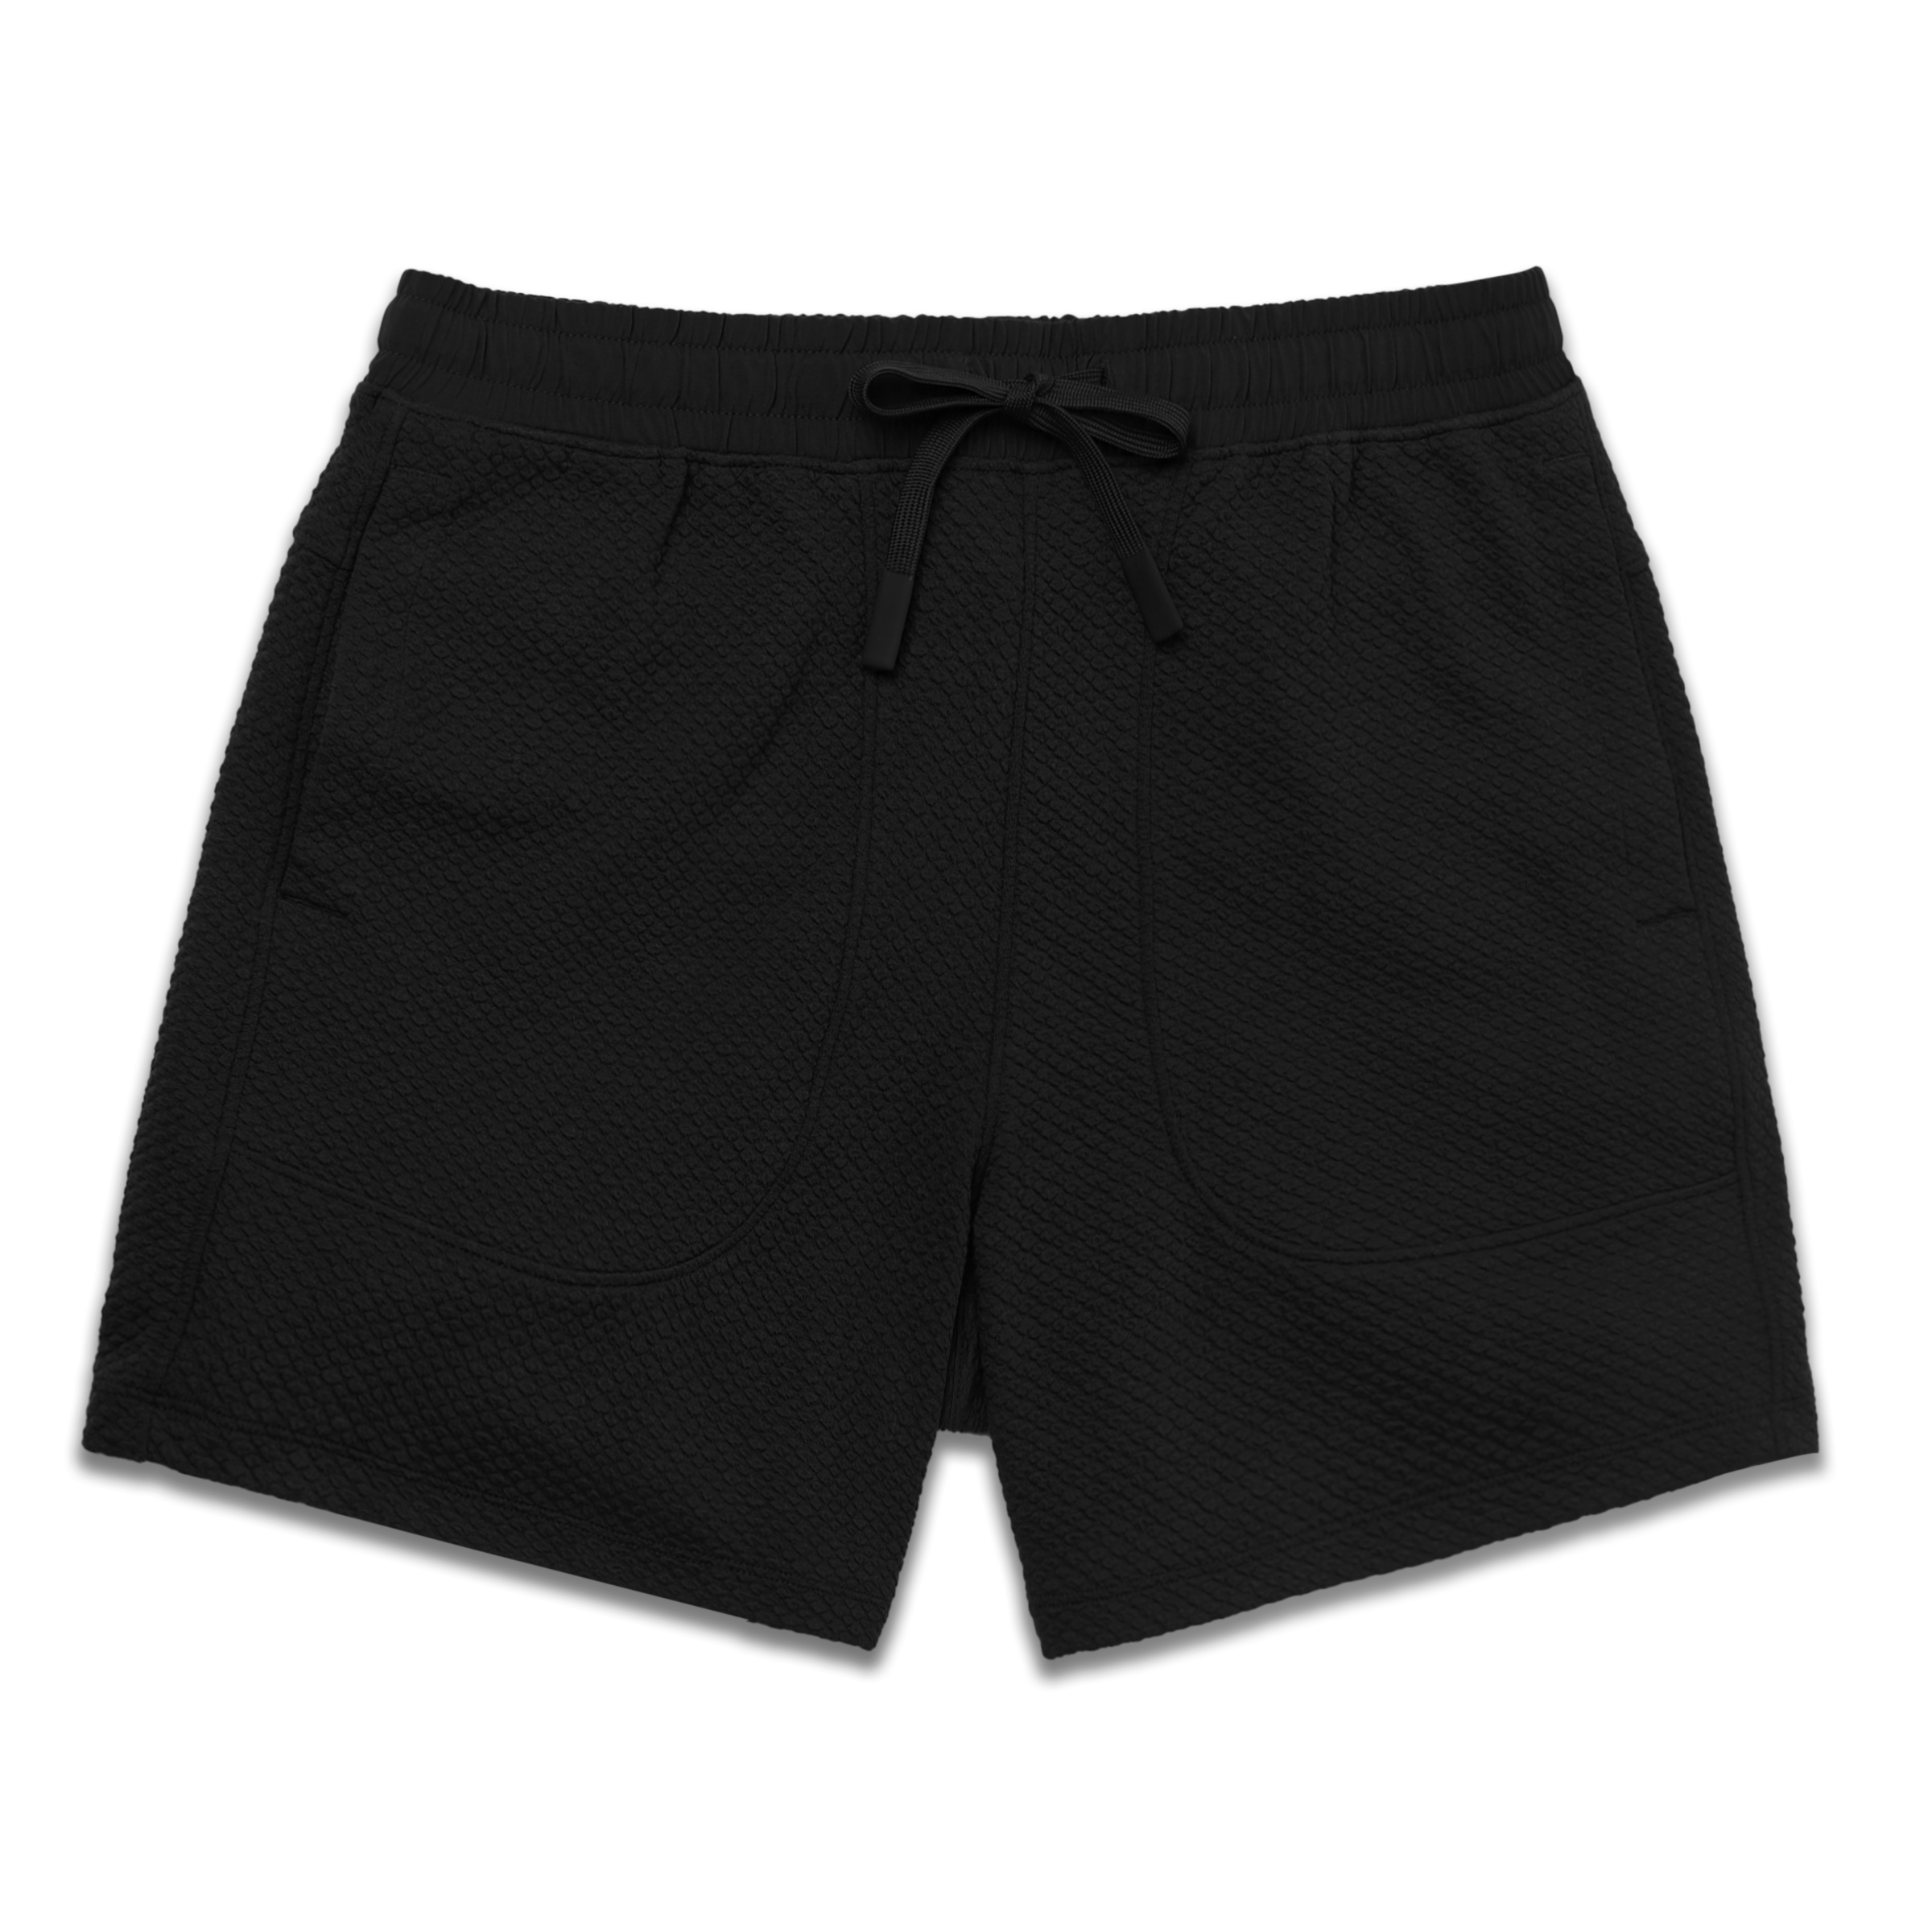 Roam Short 5.5" Black front with an elastic waistband, two side seam pockets, and dyed to match drawstring